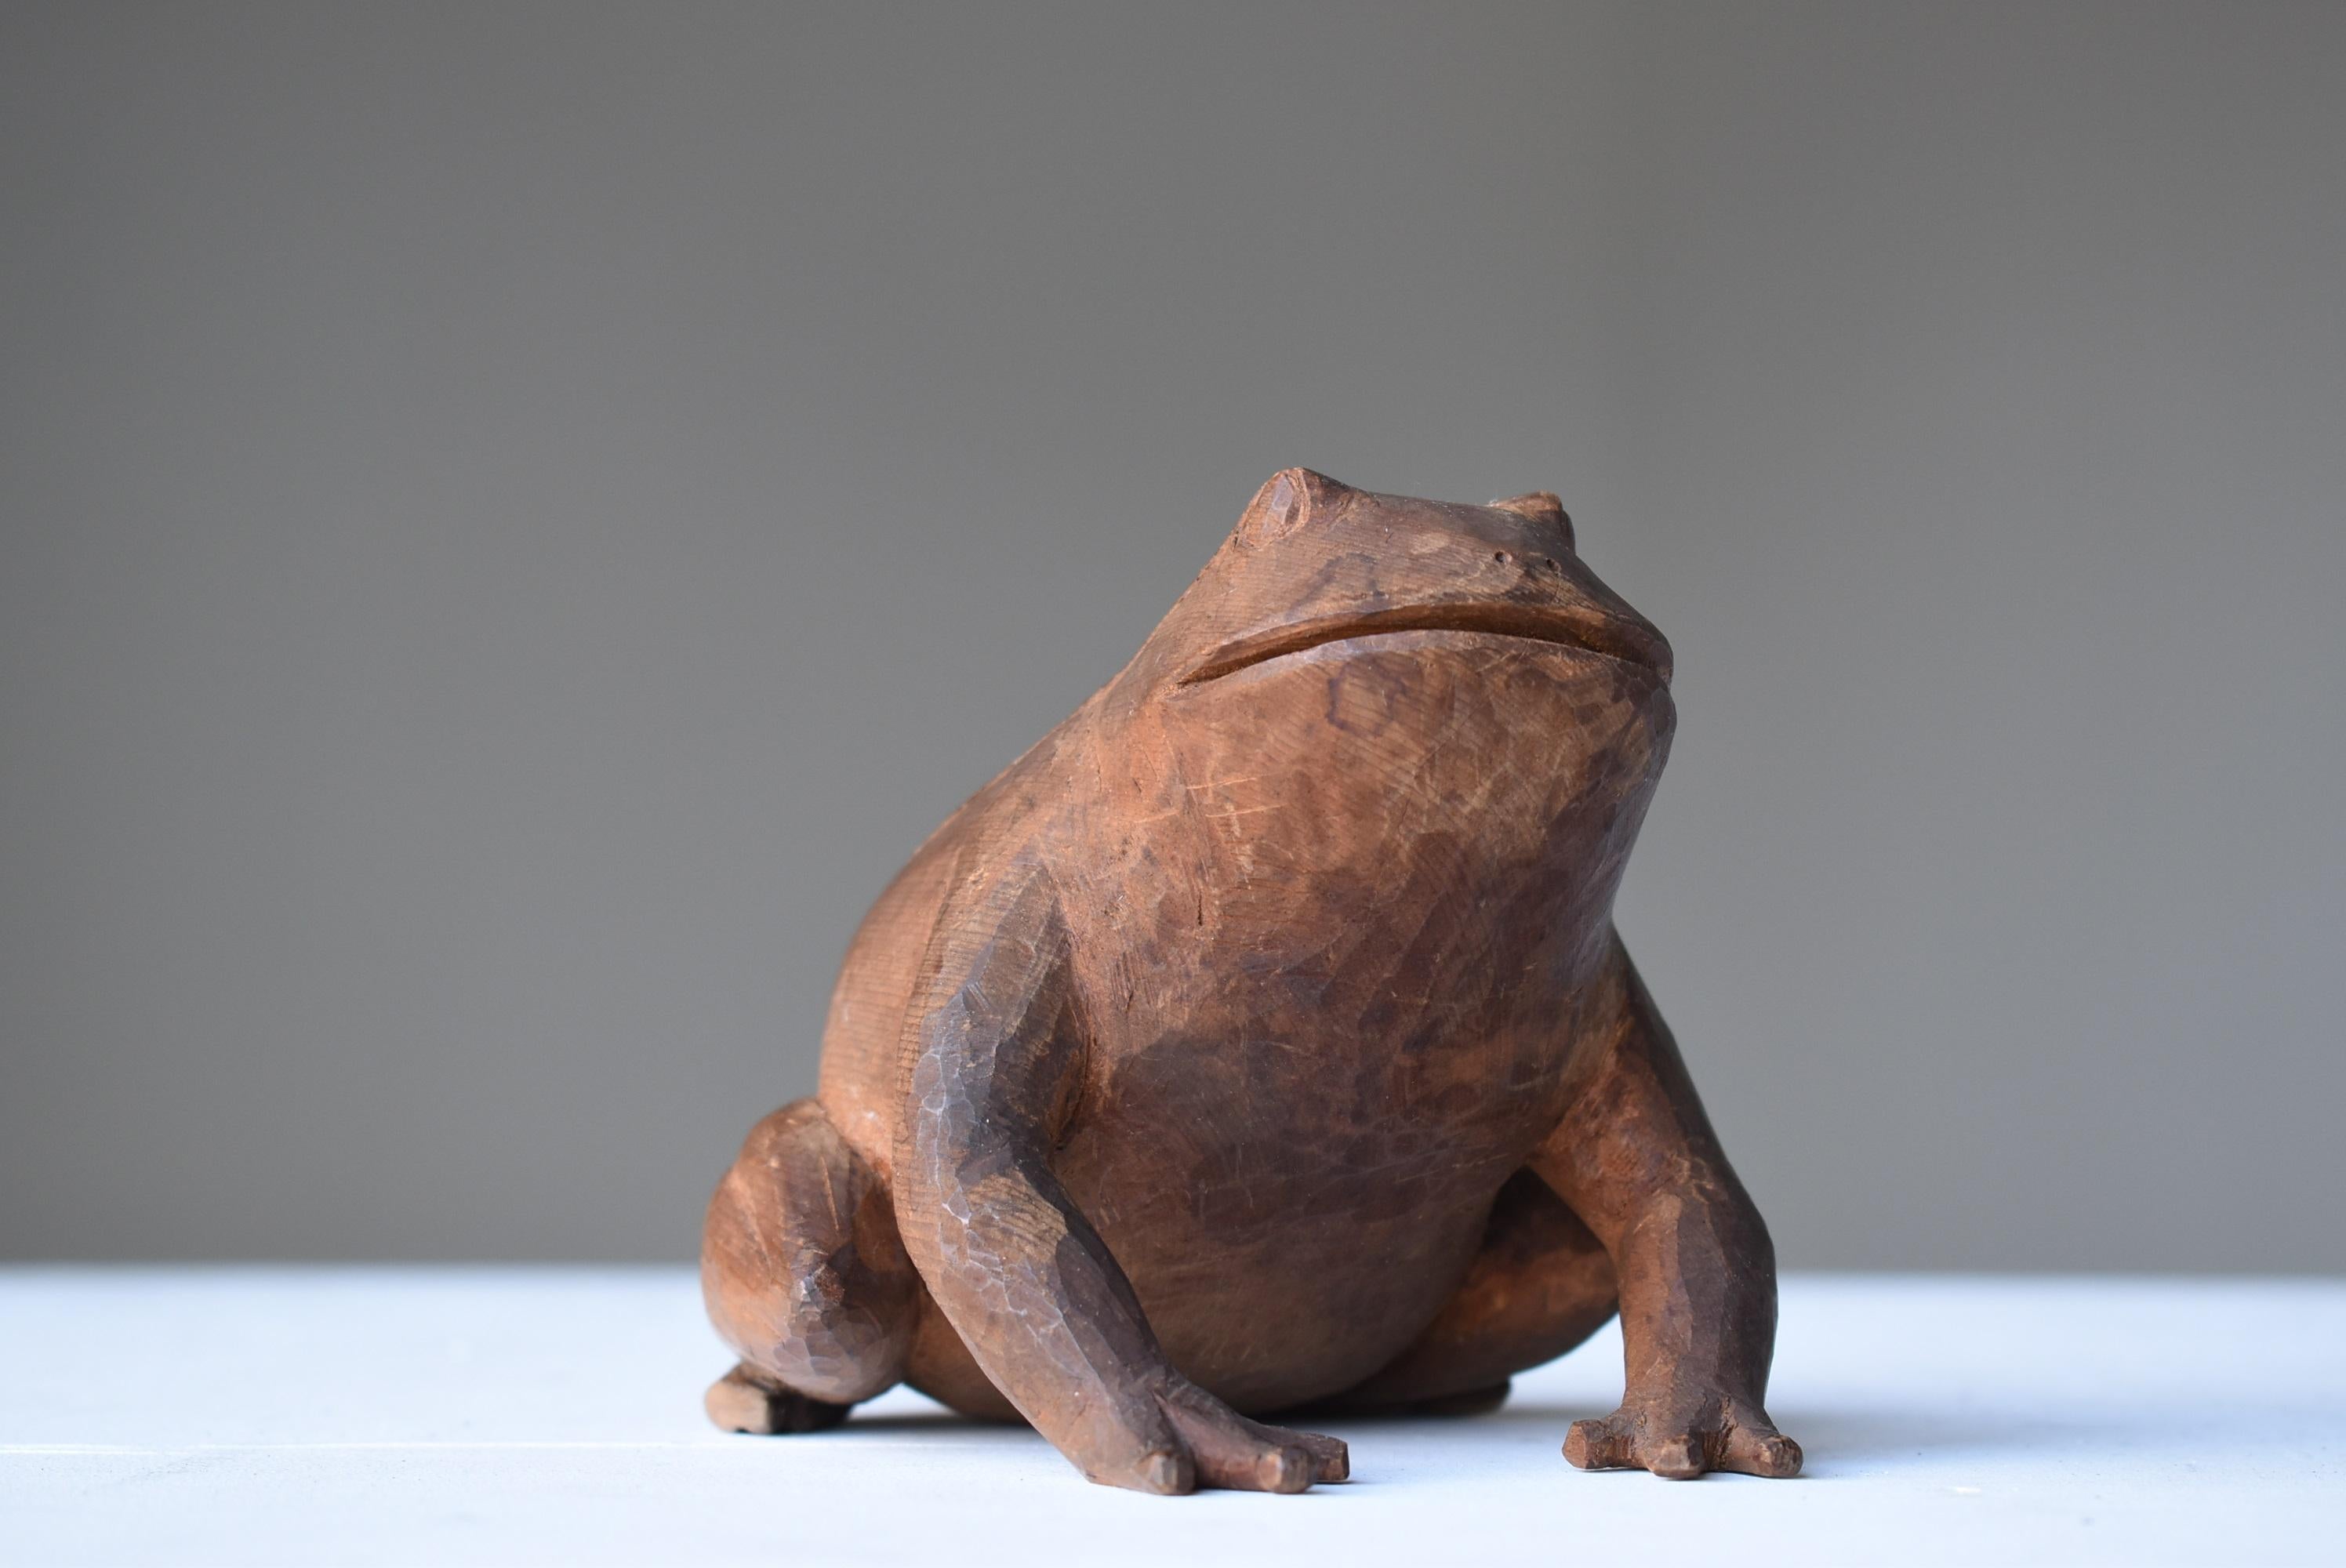 Japanese Antique Wood Carving Frog 1860s-1920s/sculpture Mingei Object 4